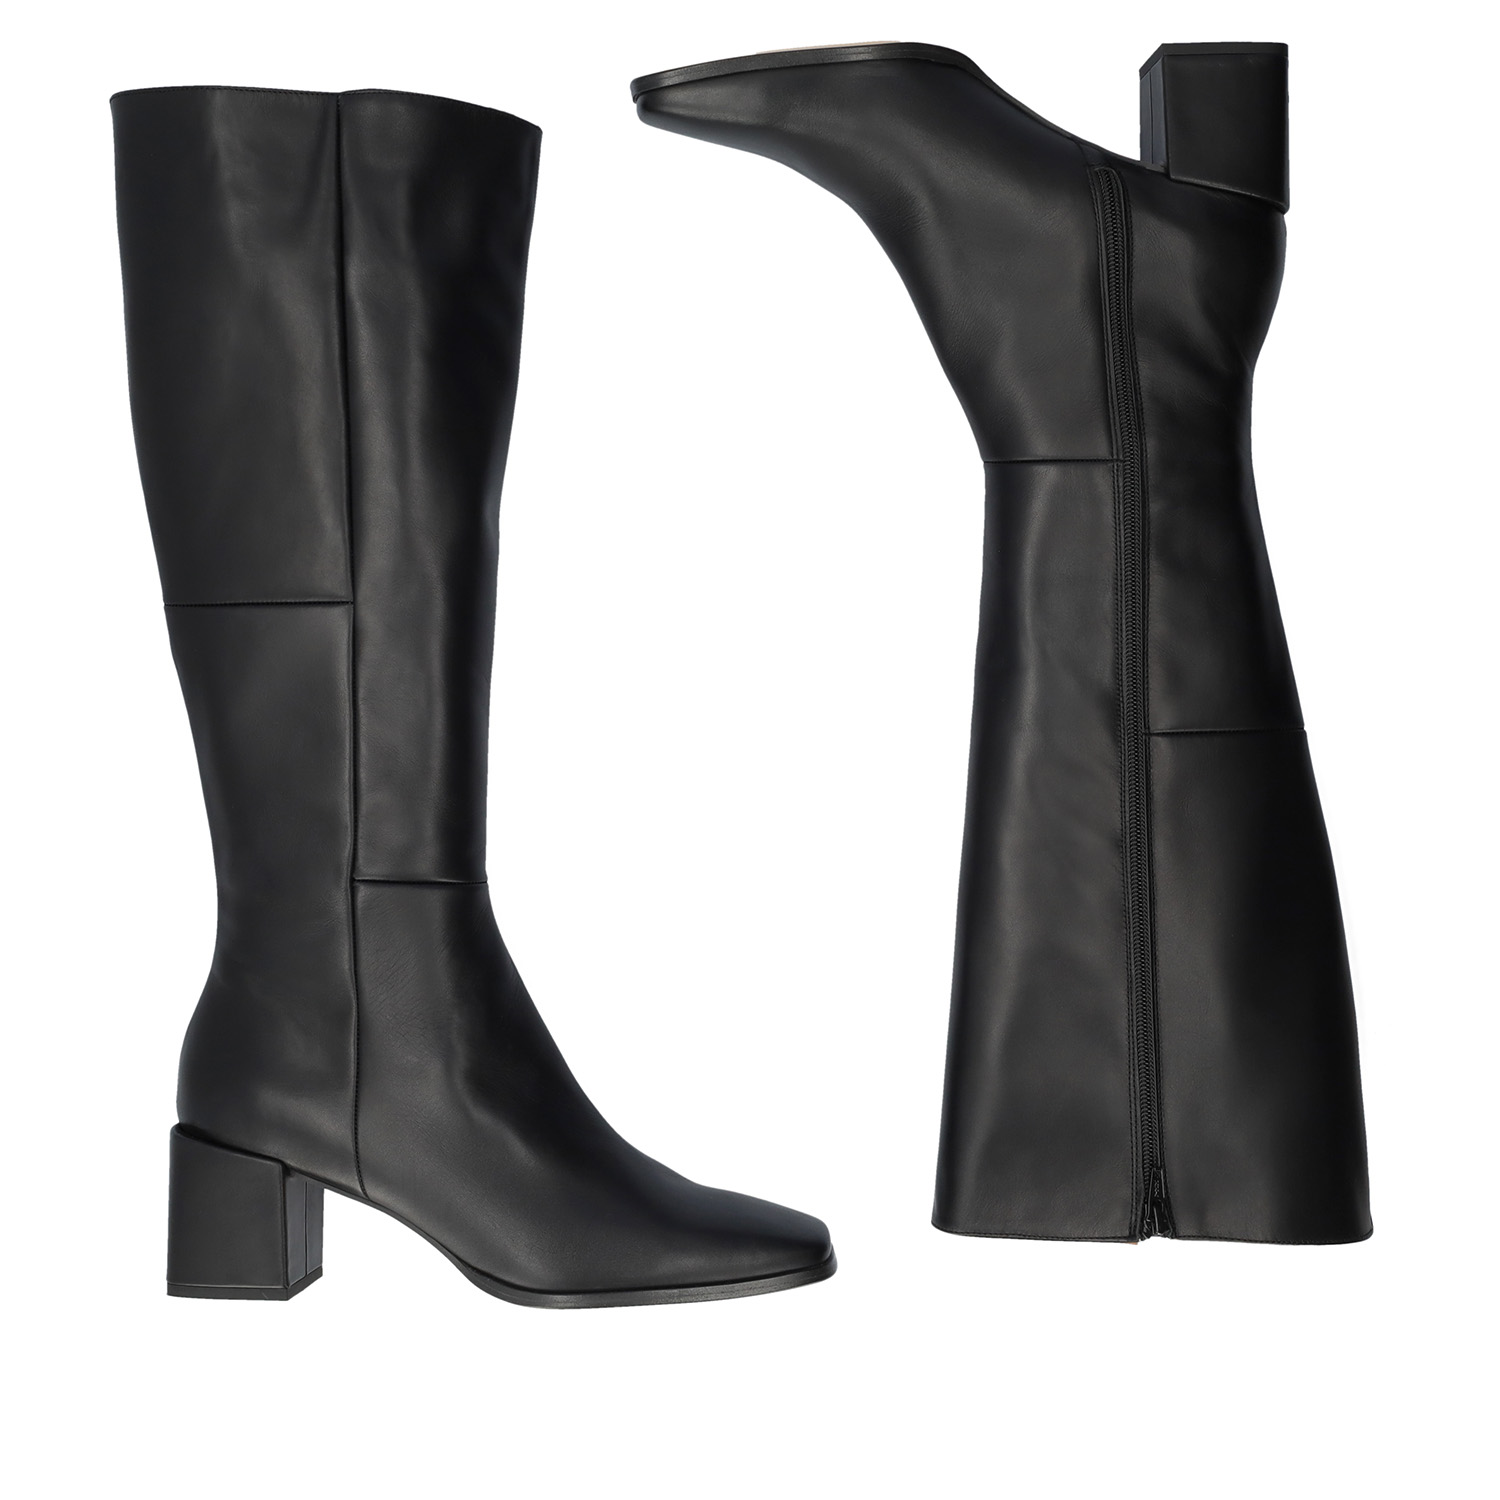 Knee-high black leather boots 